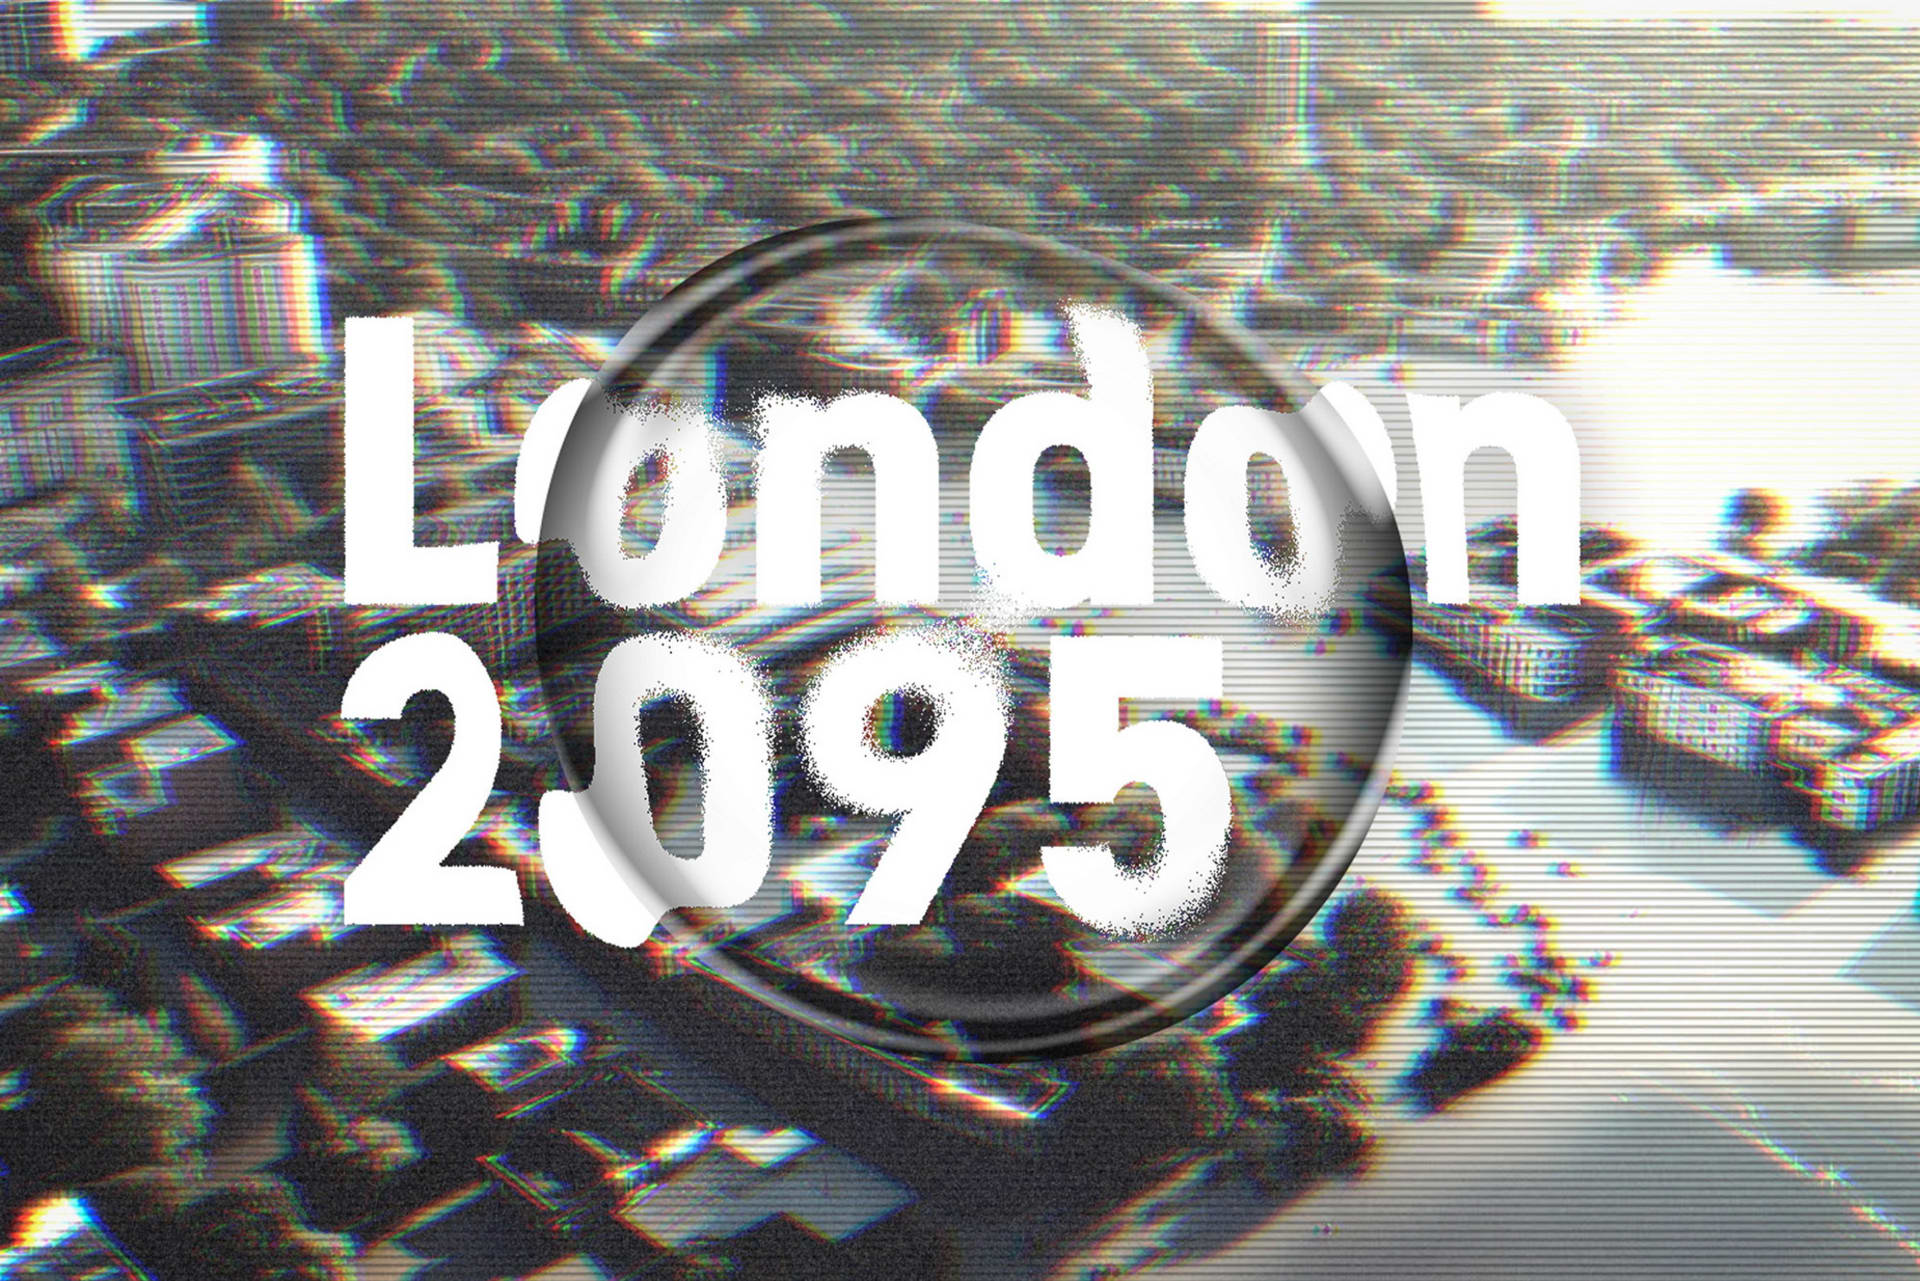 The hero image of the project "London 2095".